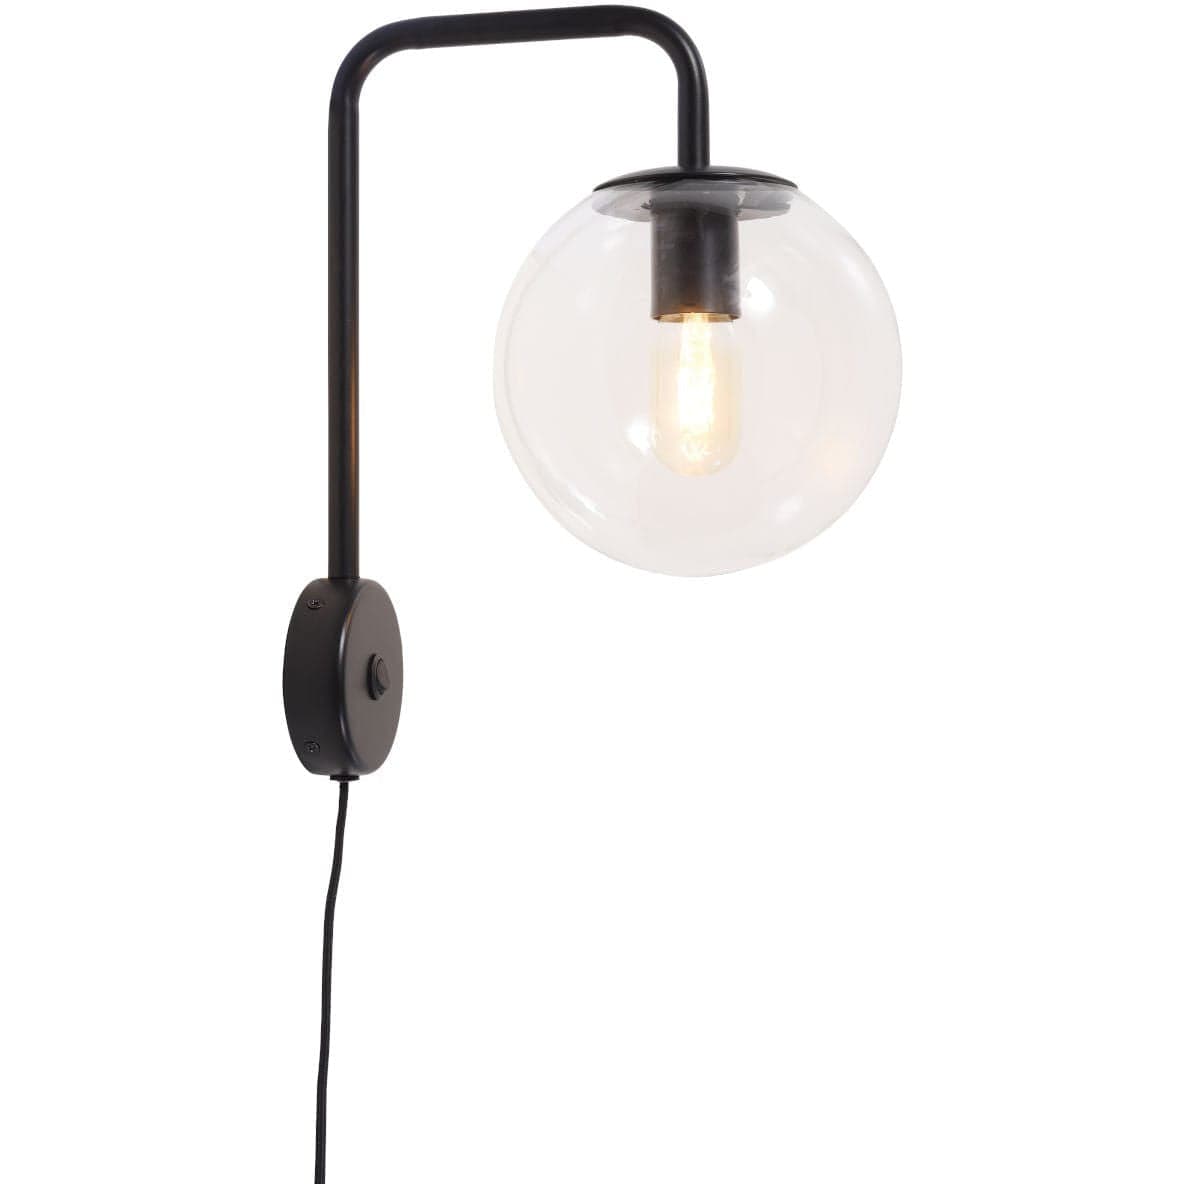 It's About RoMi Wall Lights Warsaw Wall Light Glass Black or Gold